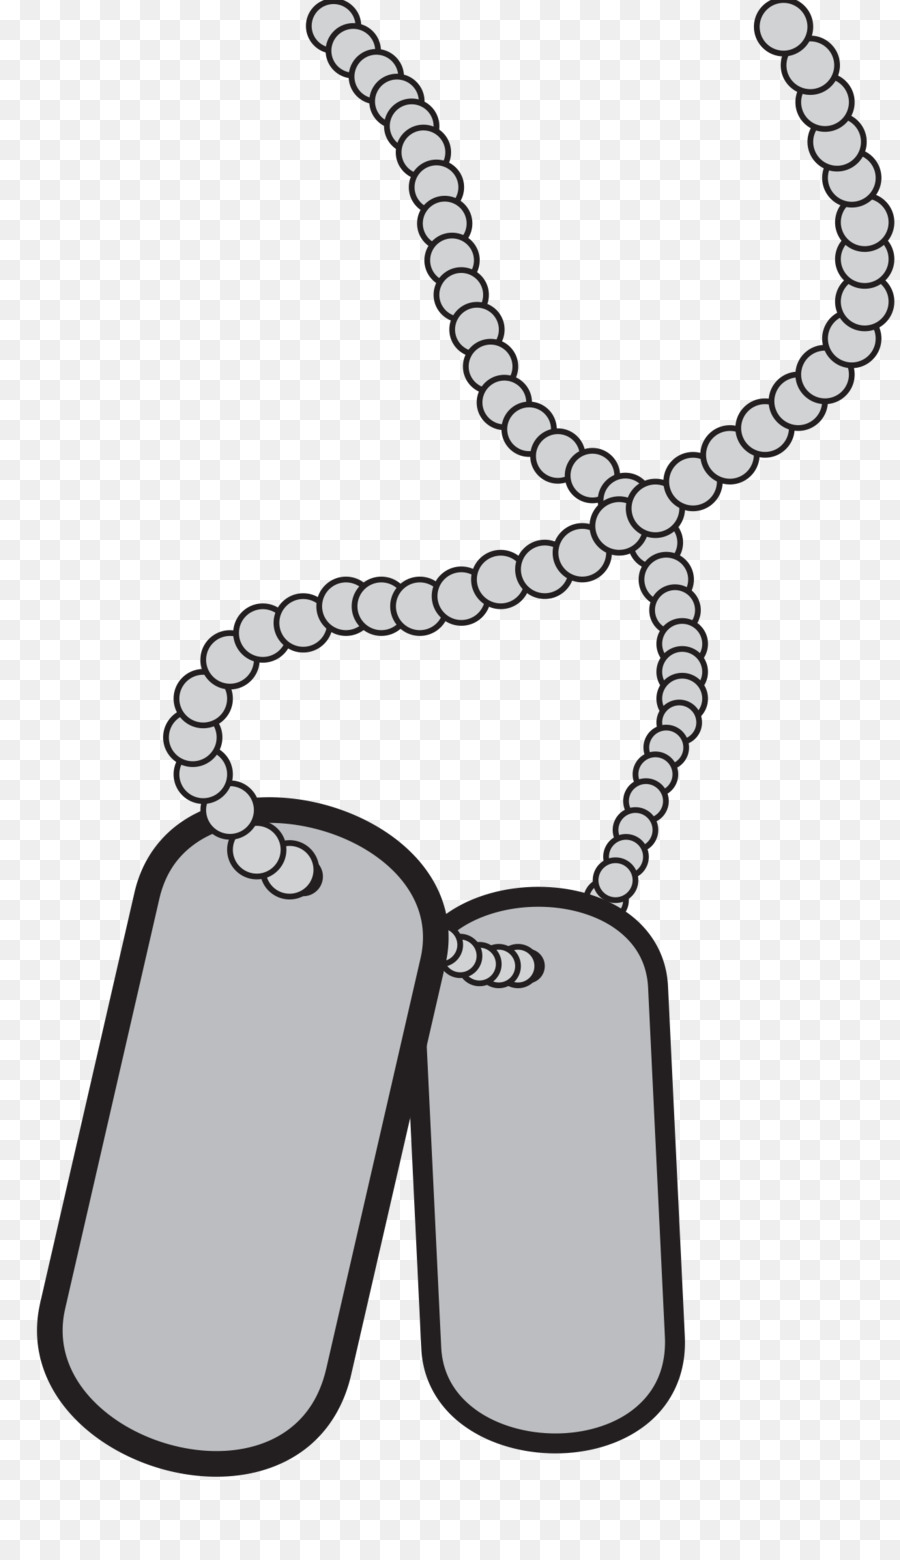 Dog Tag clipart.